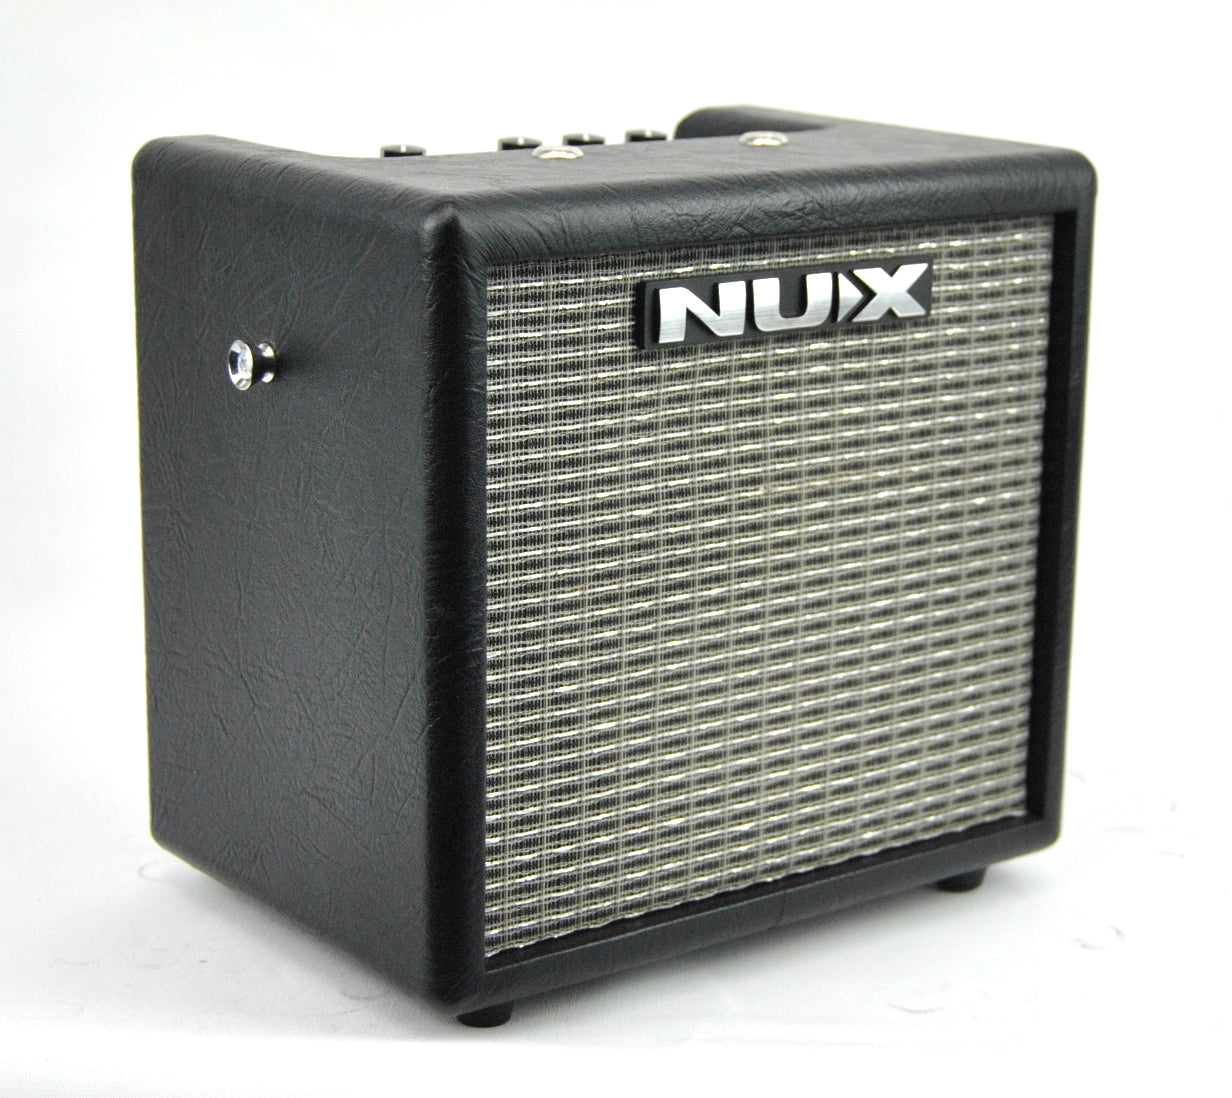 NUX Mighty 8BT